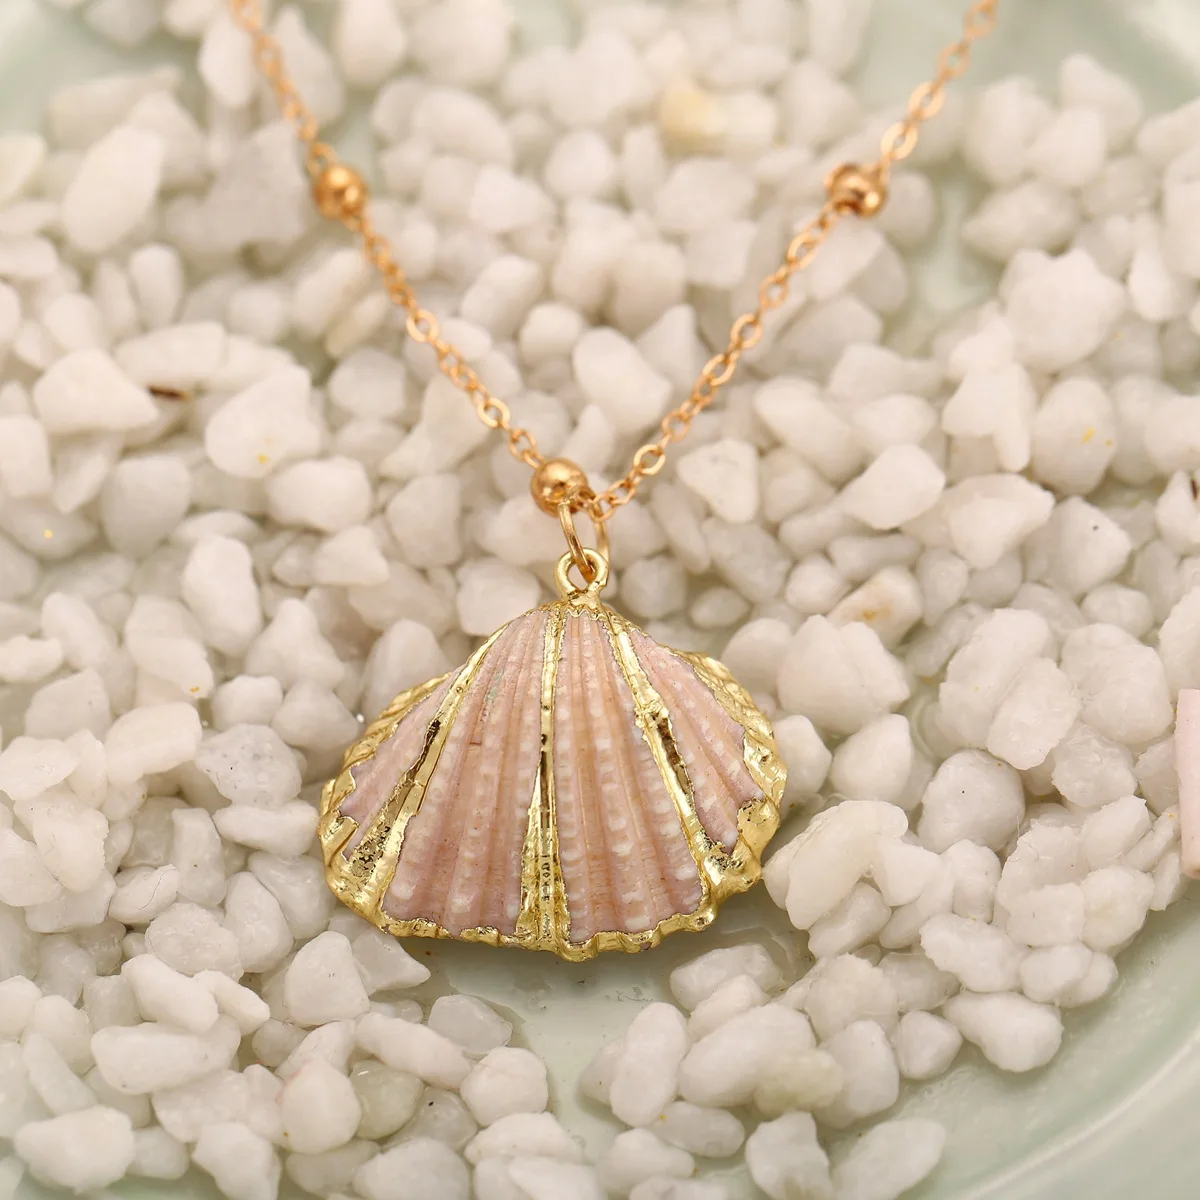 Fashion Chain Necklaces With Marine Life Vintage Pendant Jewelry Shell ...